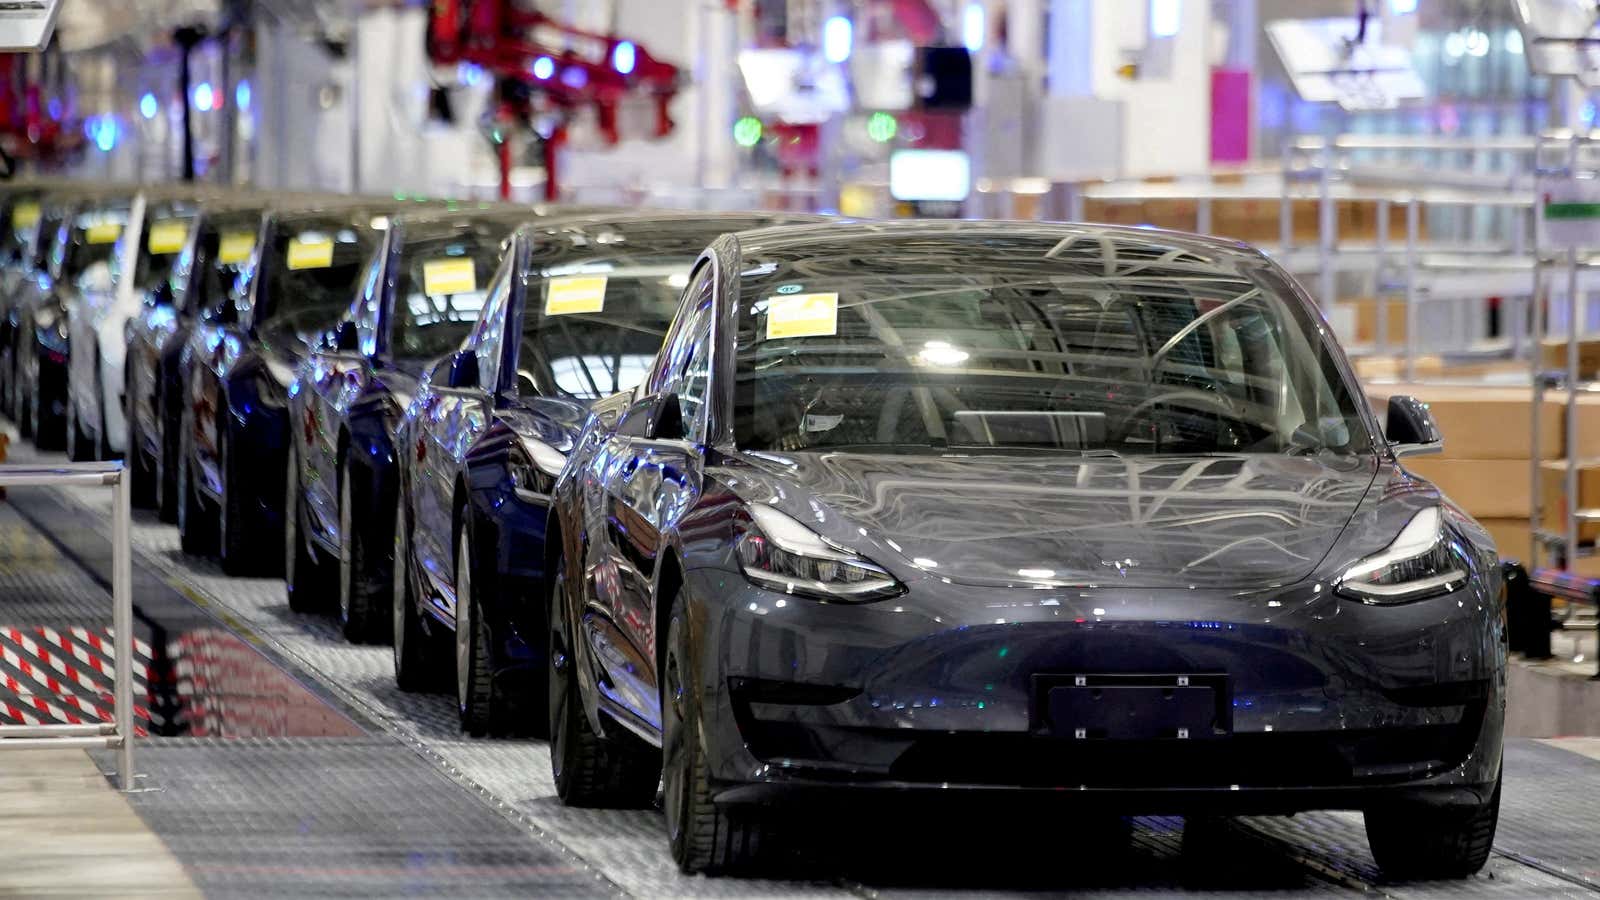 FILE PHOTO: Tesla’s China-made Model 3 vehicles are seen during a delivery event at its factory in Shanghai, China January 7, 2020. REUTERS/Aly Song/File Photo